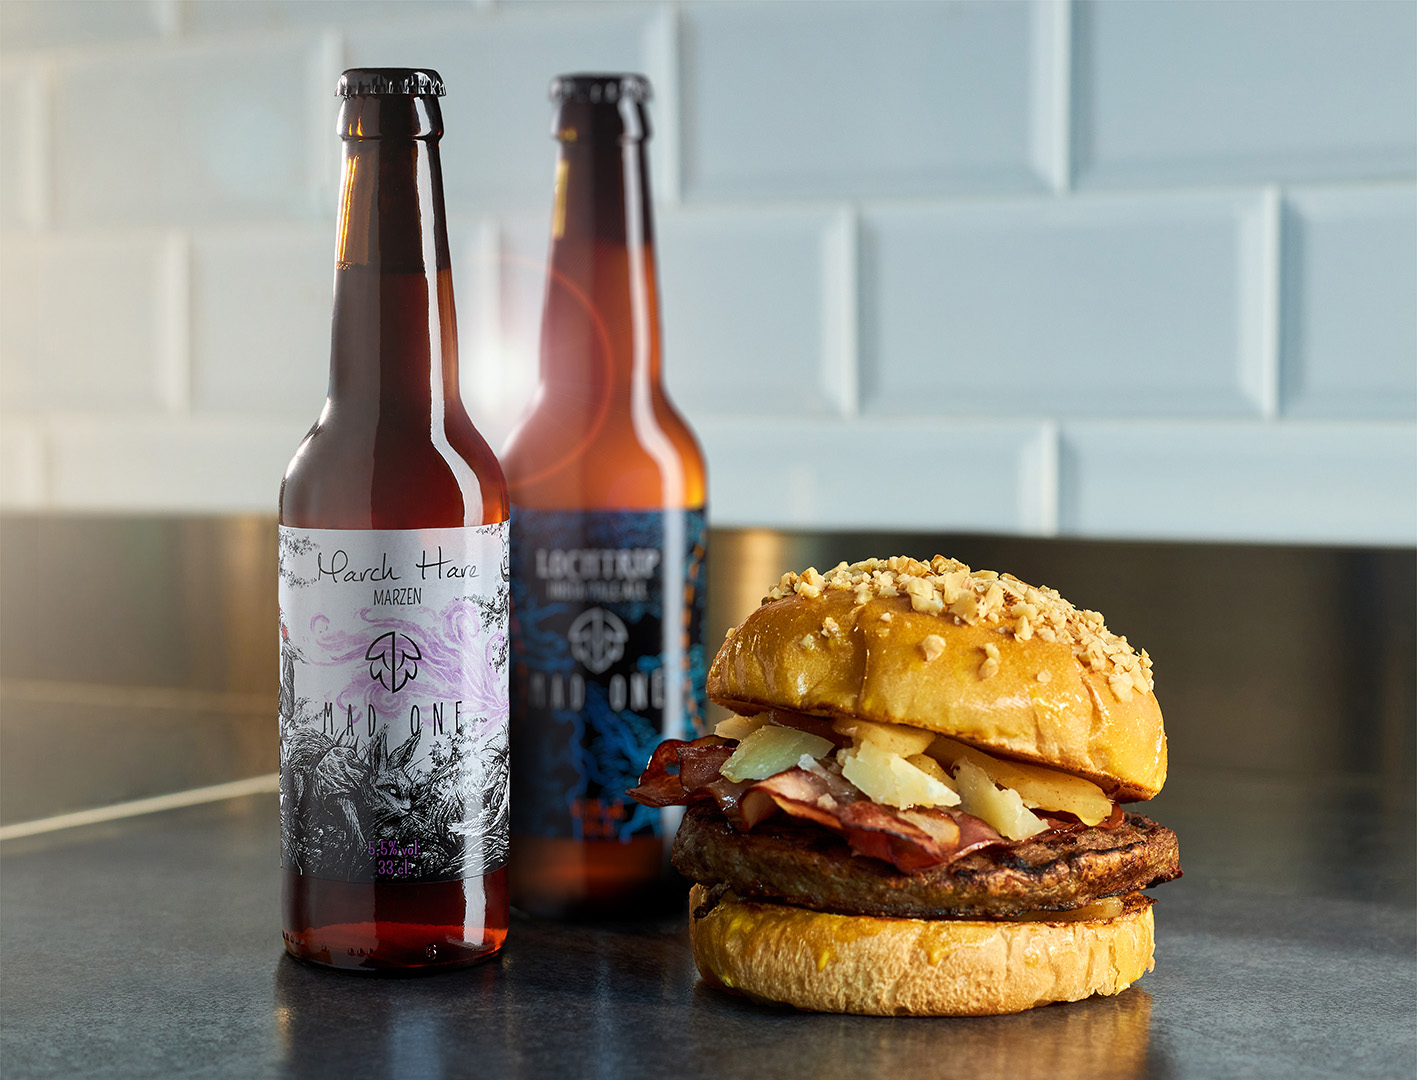 Mad One birreria burger and artisanal bottles beer by food101